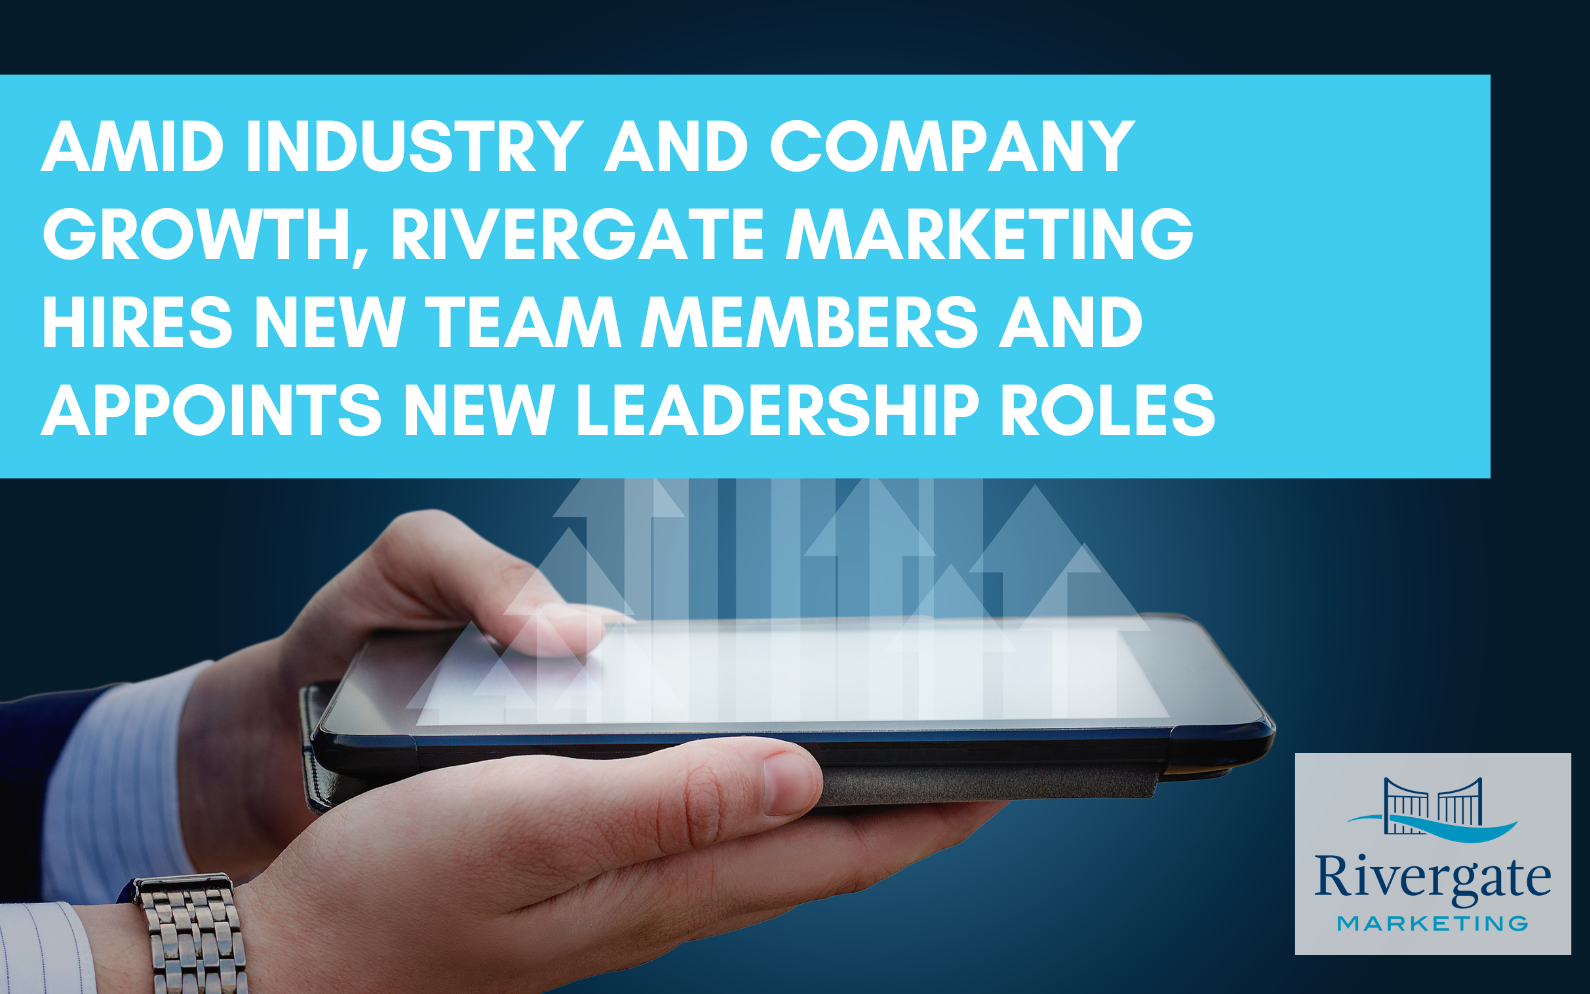 Rivergate Marketing hires new team members and appoints new leadership roles.